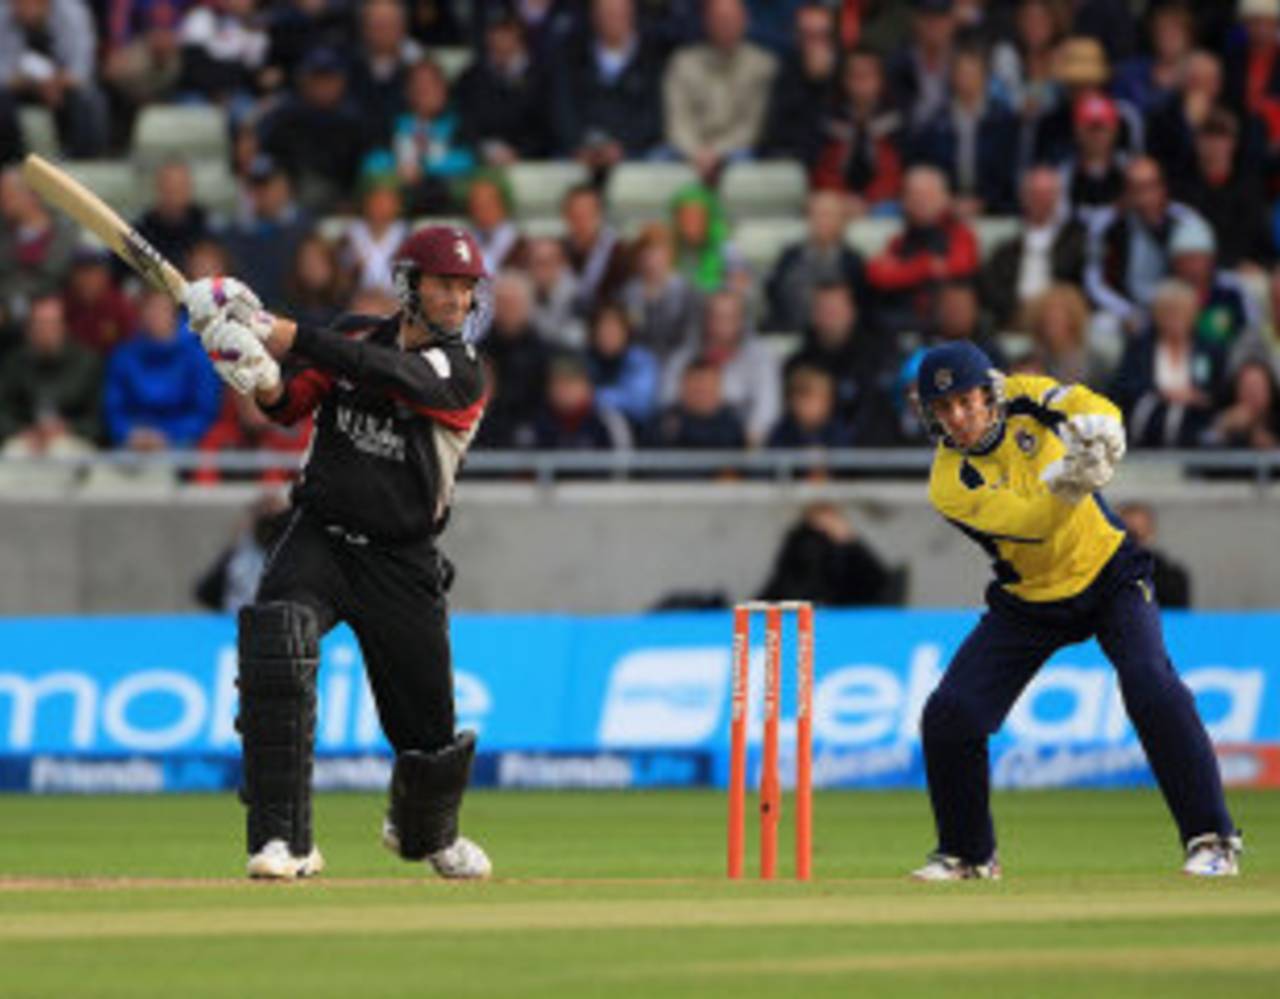 Marcus Trescothick launched Somerset's chase in fine style, Hampshire v Somerset, Friends Life t20, 2nd Semi Final, Edgbaston, August 27 2011